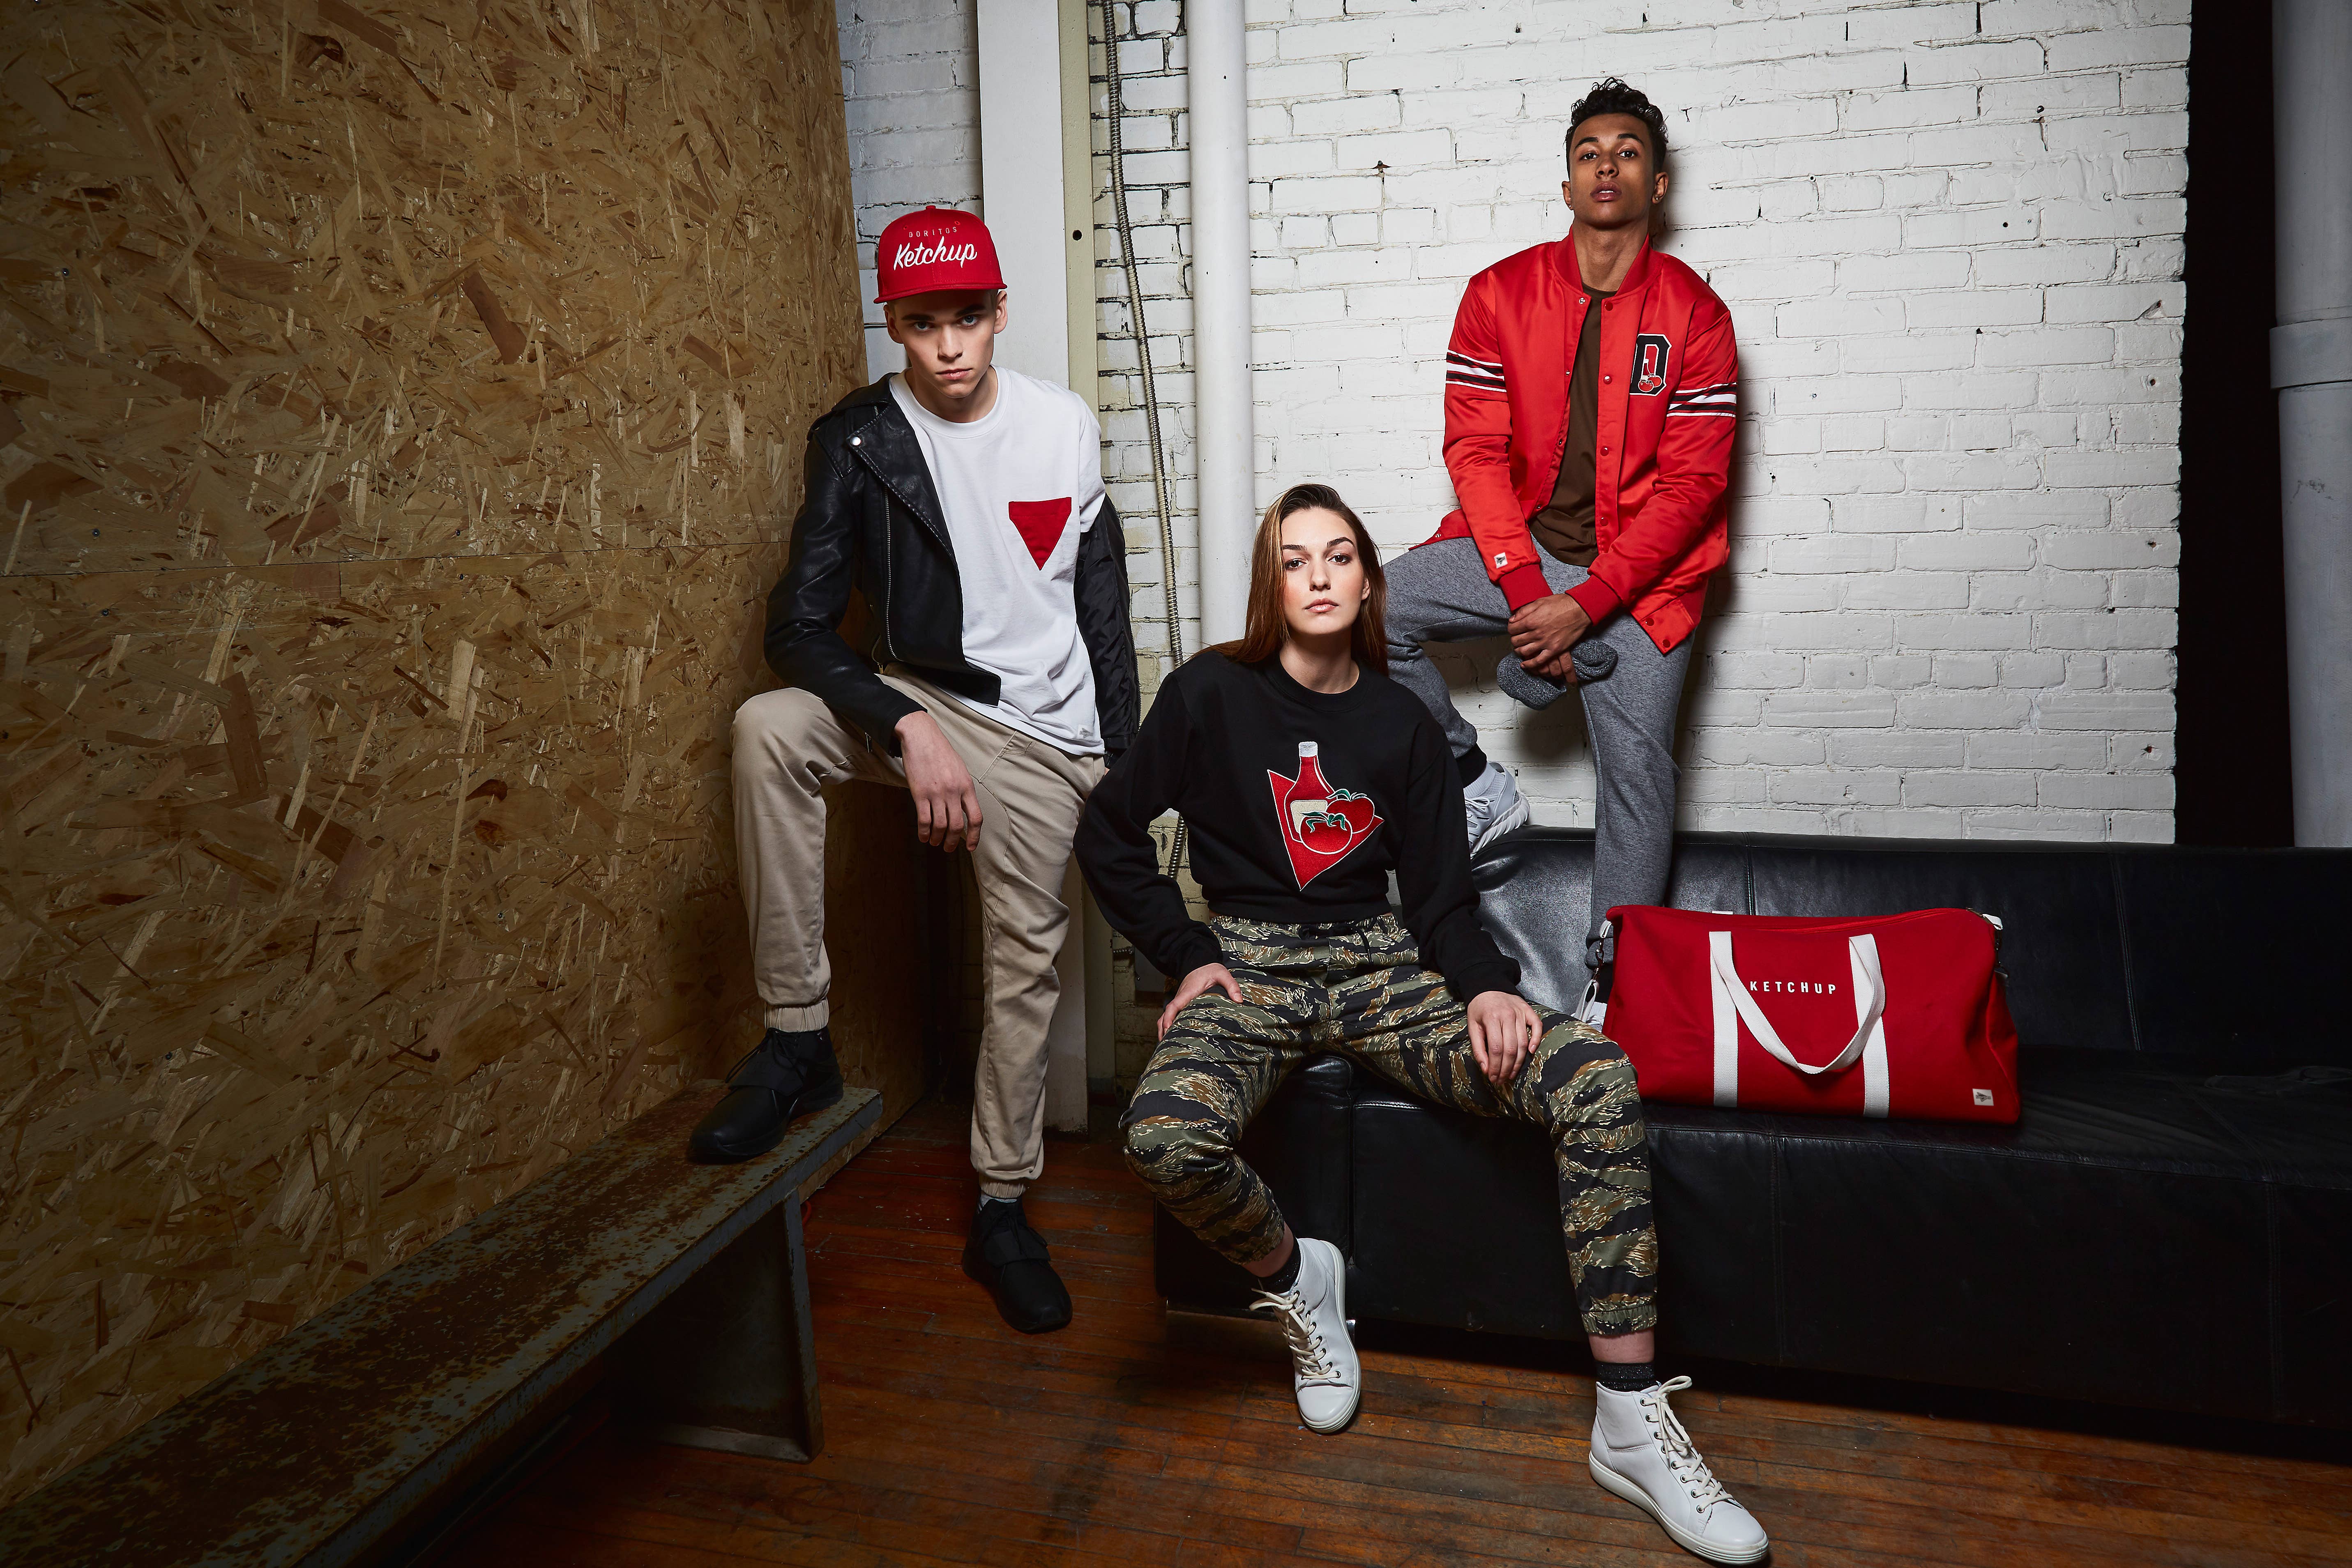 PROMO: Doritos® Canada Is Releasing The Clothing Line You Never Saw Coming